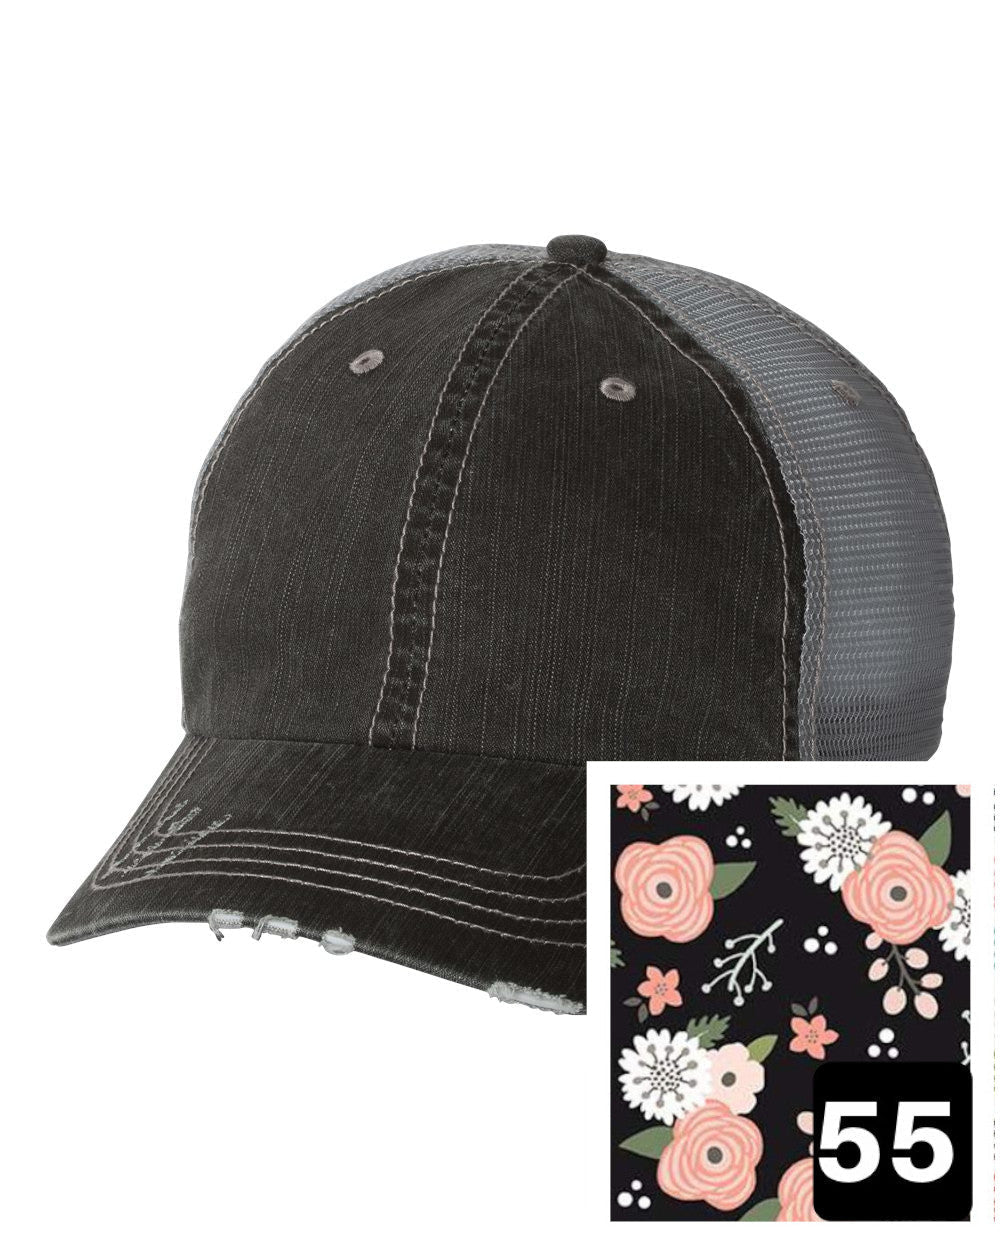 gray distressed trucker hat with petite floral on navy fabric state of Illinois